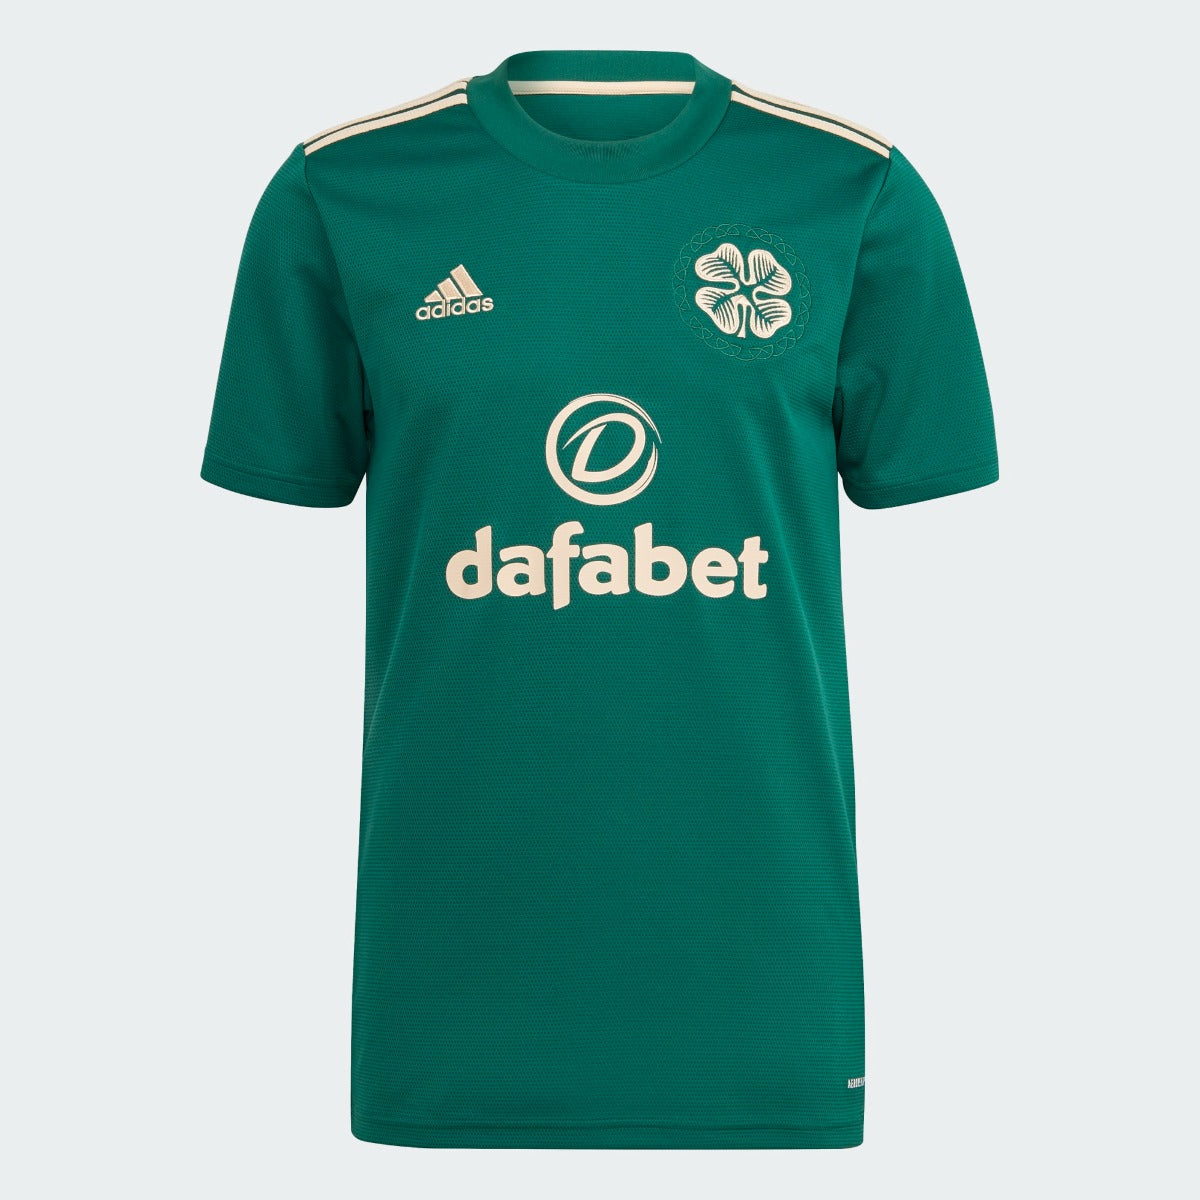 Adidas 2021-22 Celtic Away Jersey - Green (Front)